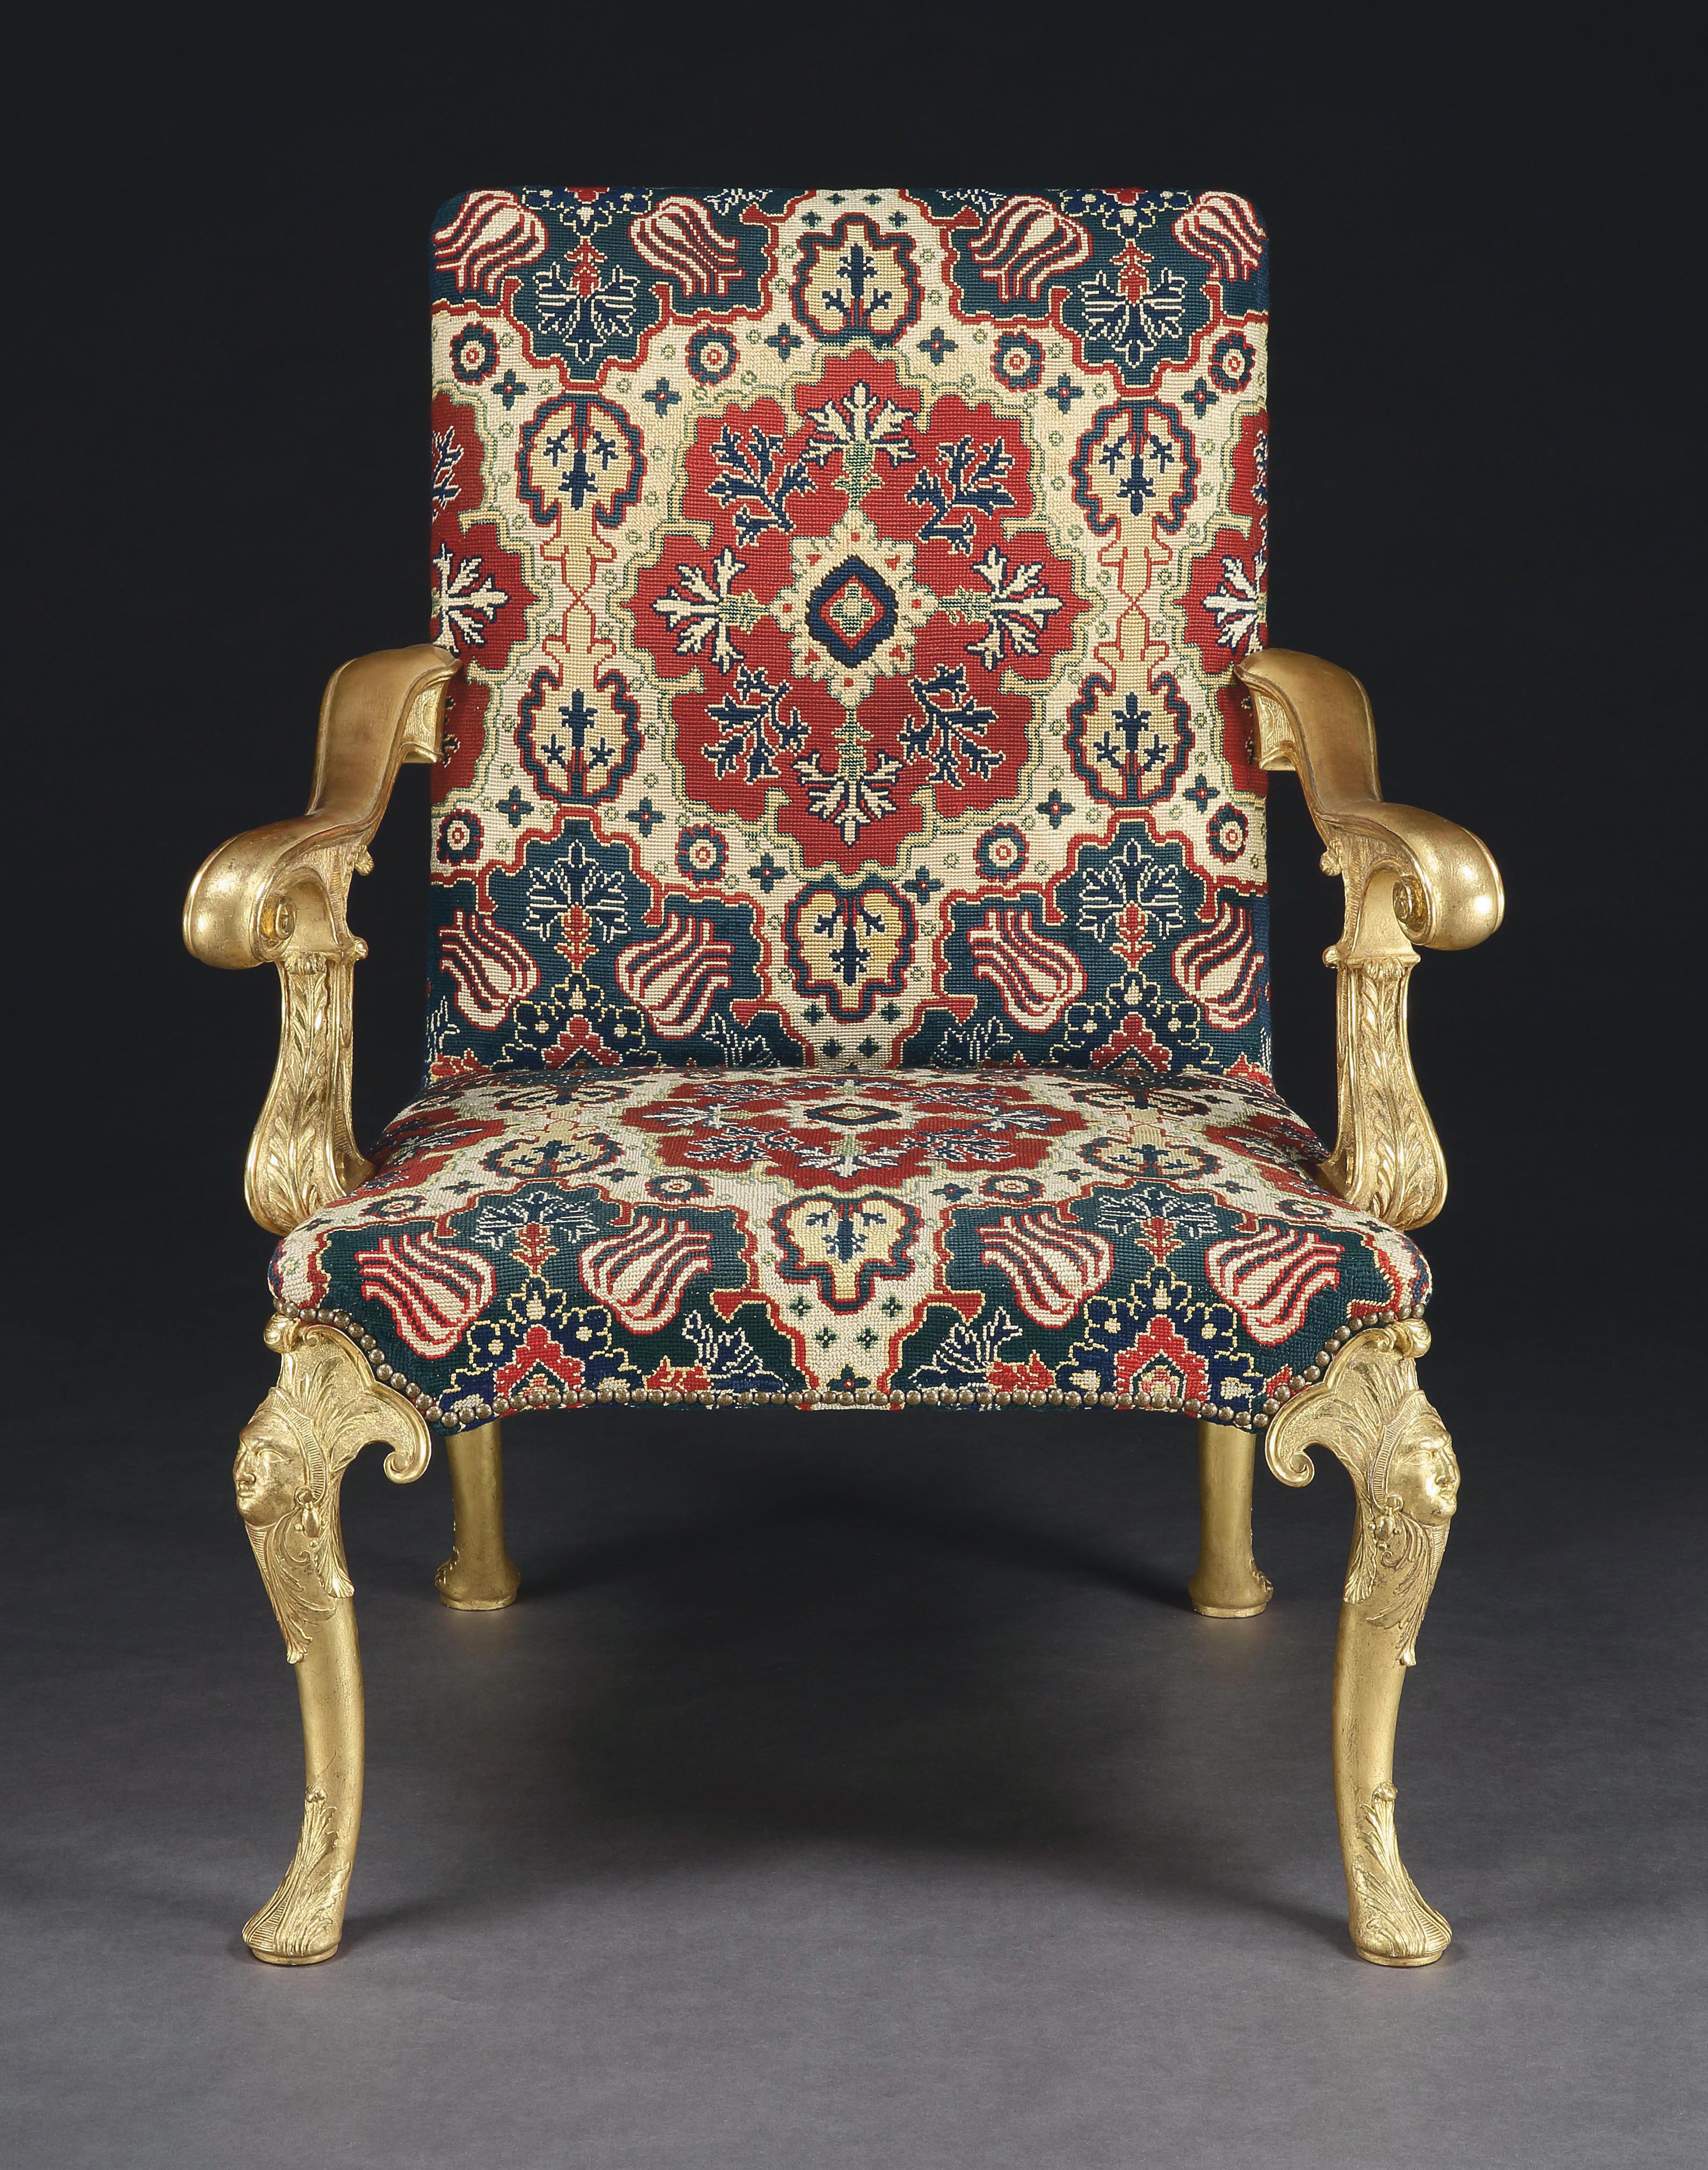 English Lord Monson's, Wanstead House Chairs a Pair of George I Carved & Gilded Armchair